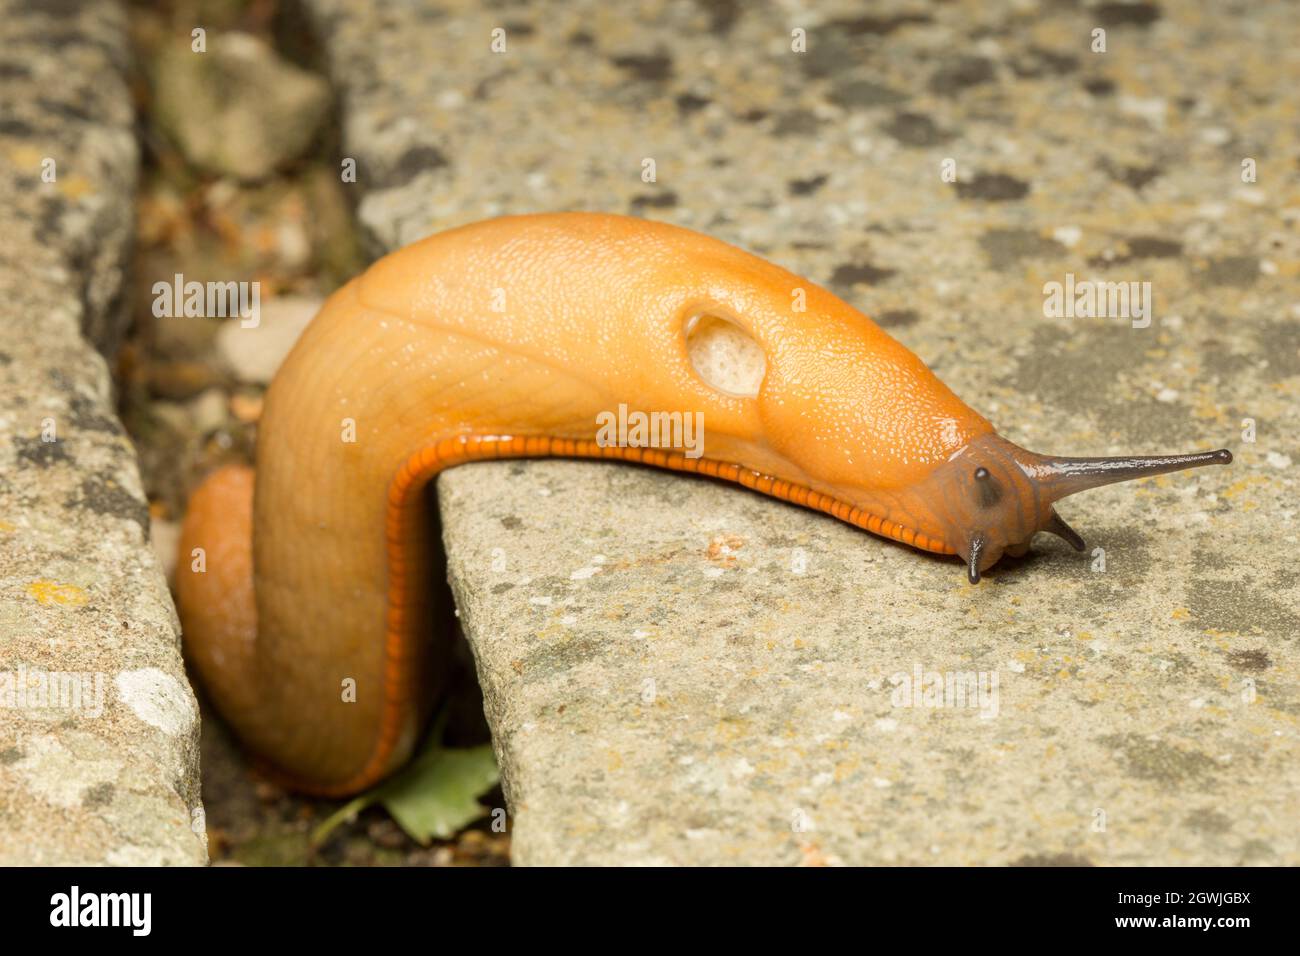 A large red slug, Arion ater, out at night on a patio near a garden pond. Its open pneumostome or breathing pore can be seen in the picture. Lancashir Stock Photo